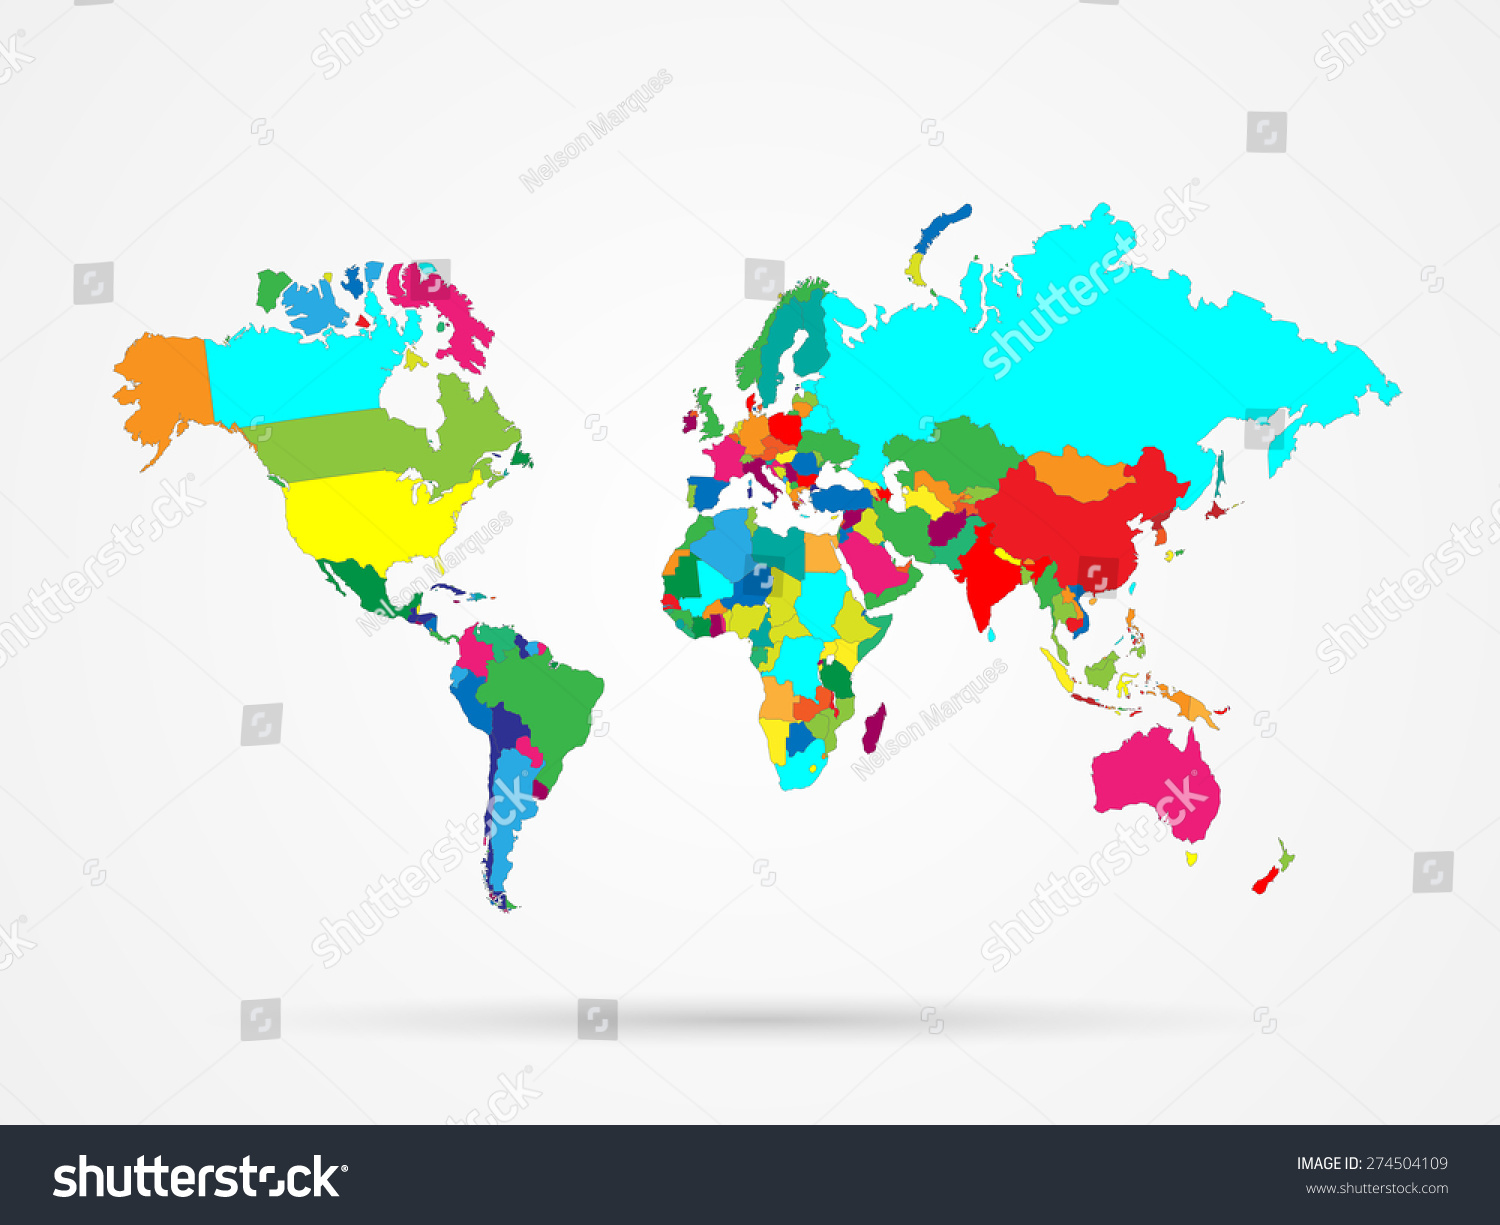 Illustration of a colorful world map isolated on a white background. #274504109